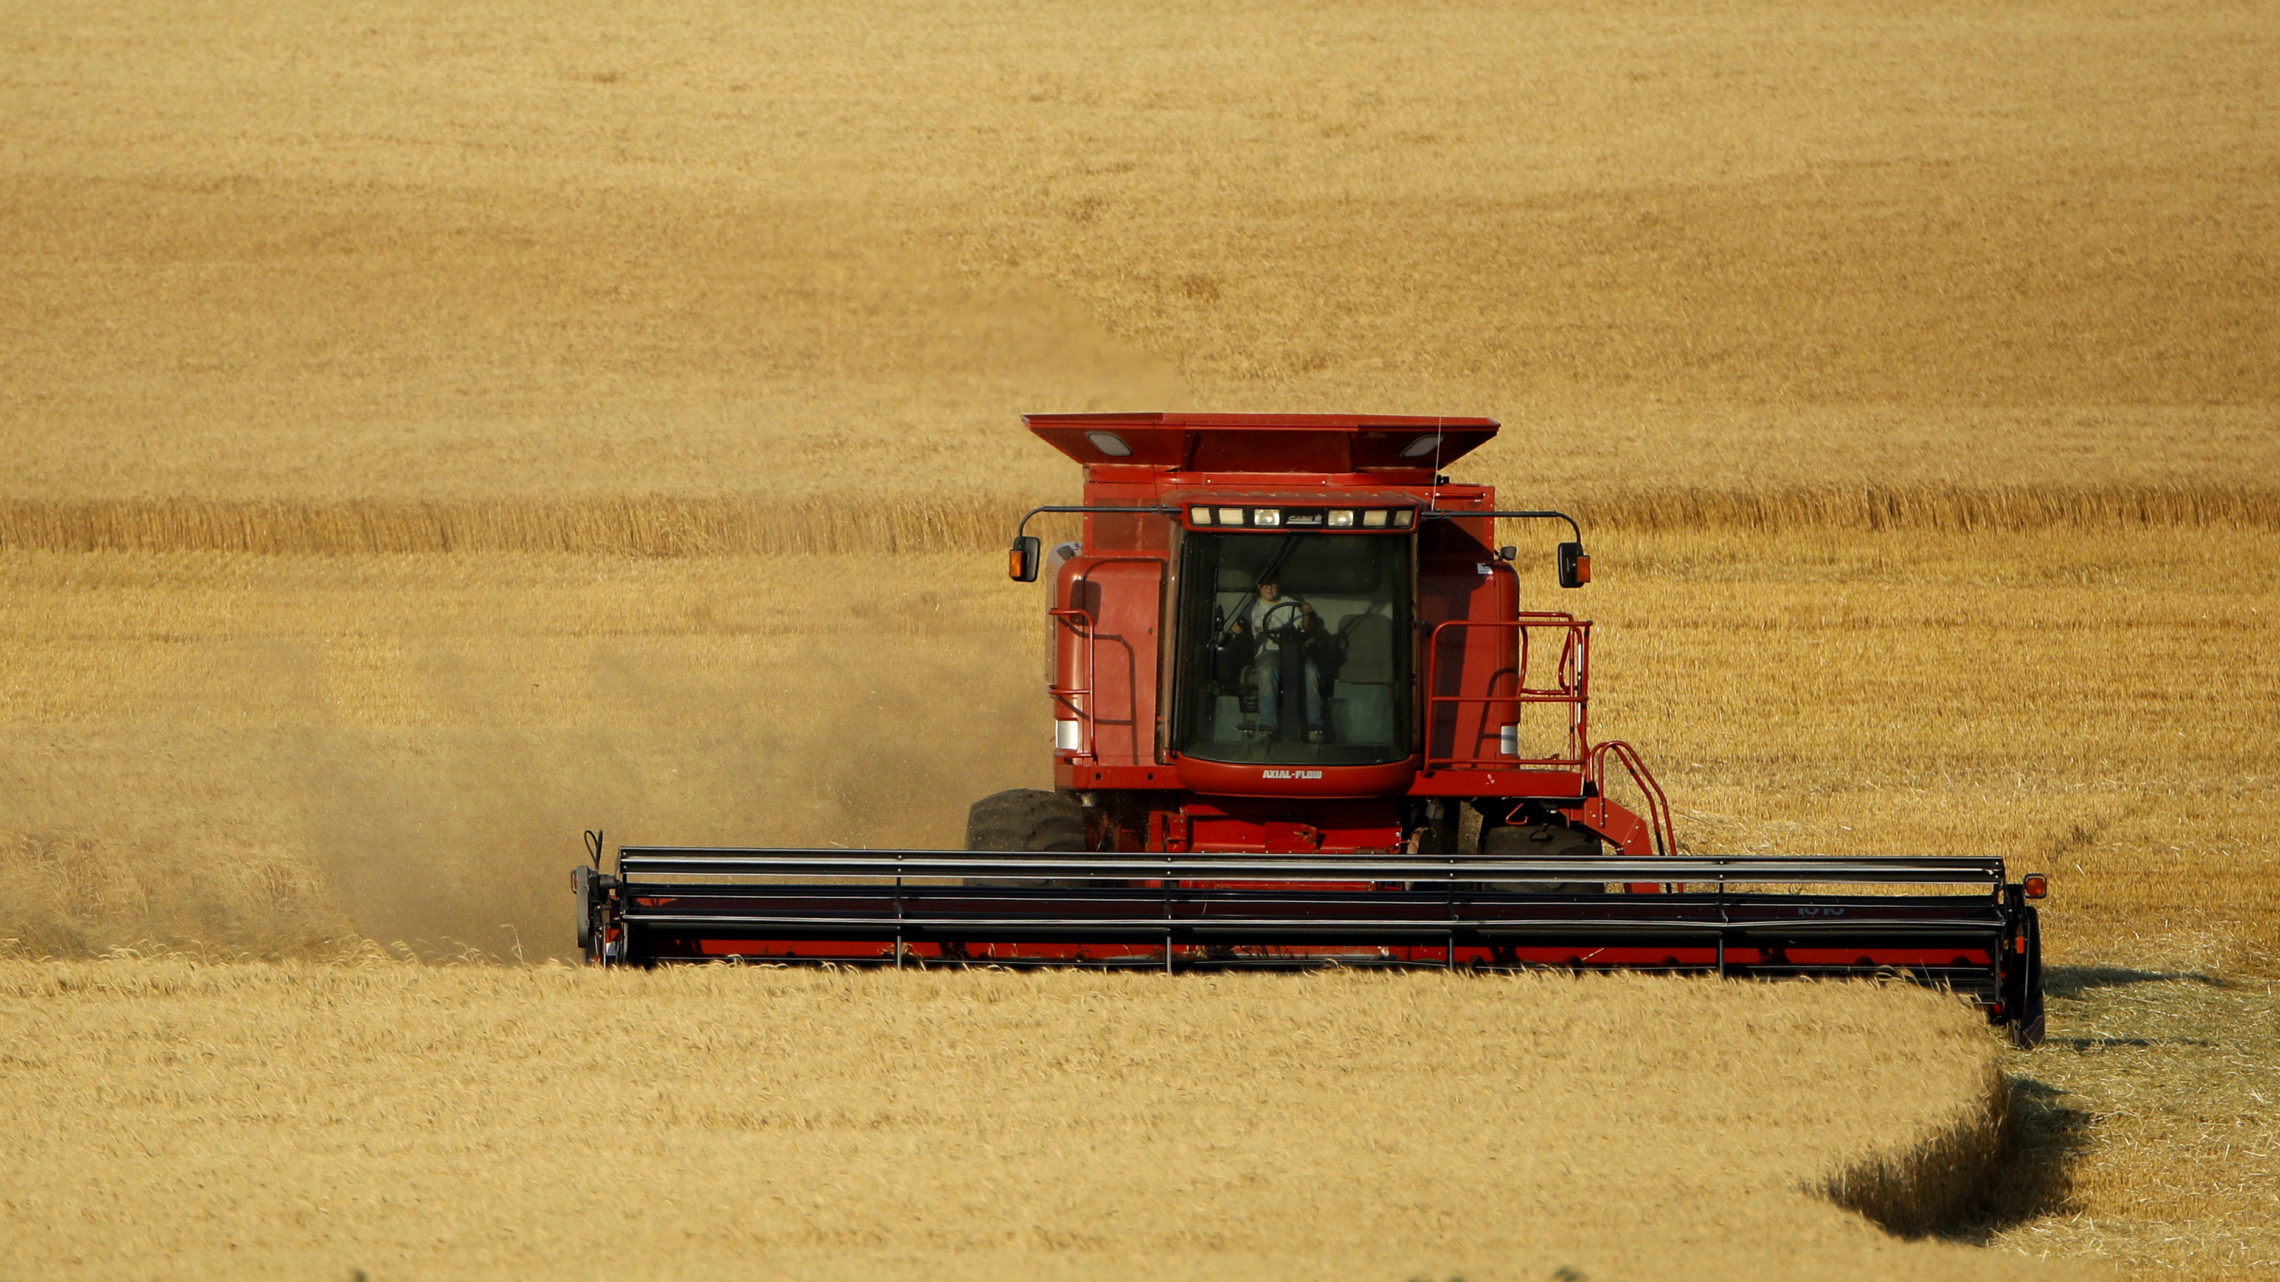 Winter wheat is harvested in a field farmed by Dalton and Carson North near McCracken, Kansas. CREDIT: CHARLIE RIEDEL/AP PHOTO